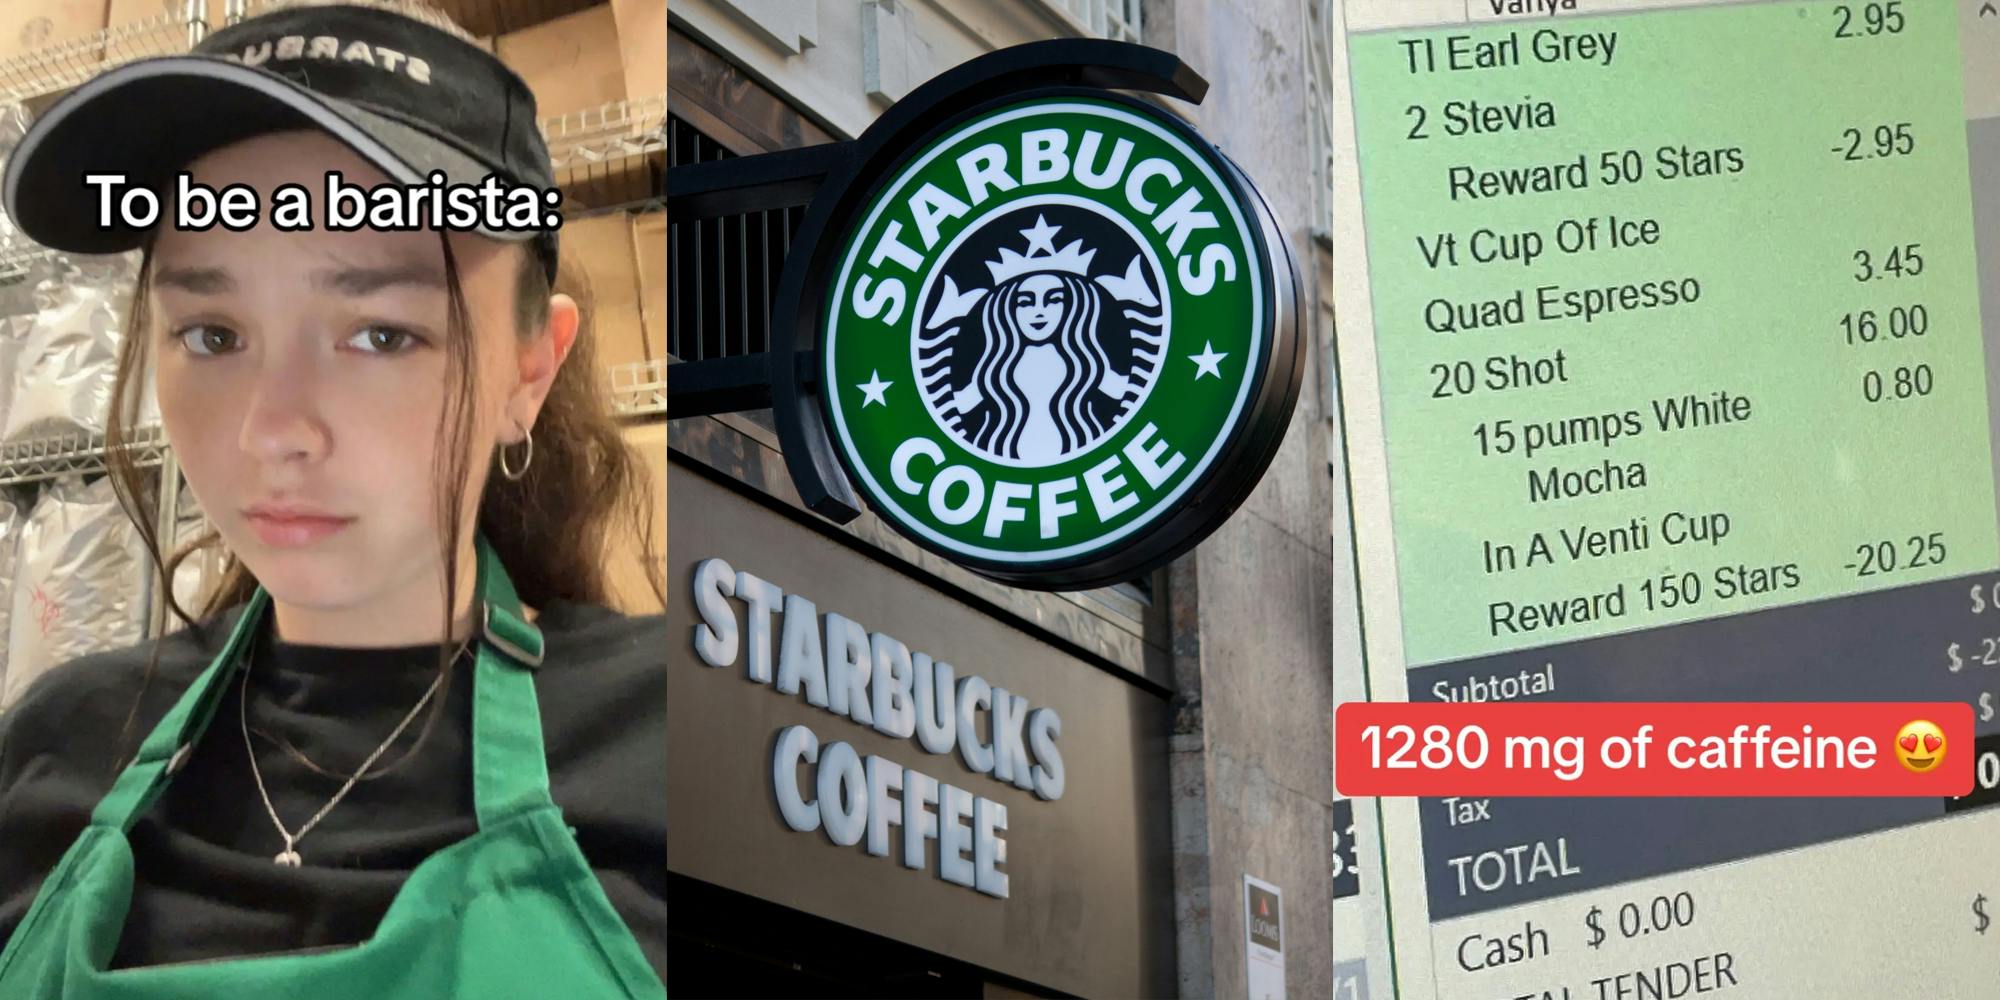 Starbucks barista with caption "To be a barista:" (l) Starbucks signs on building (c) Starbucks order screen with caption "1280 mg of caffeine" (r)